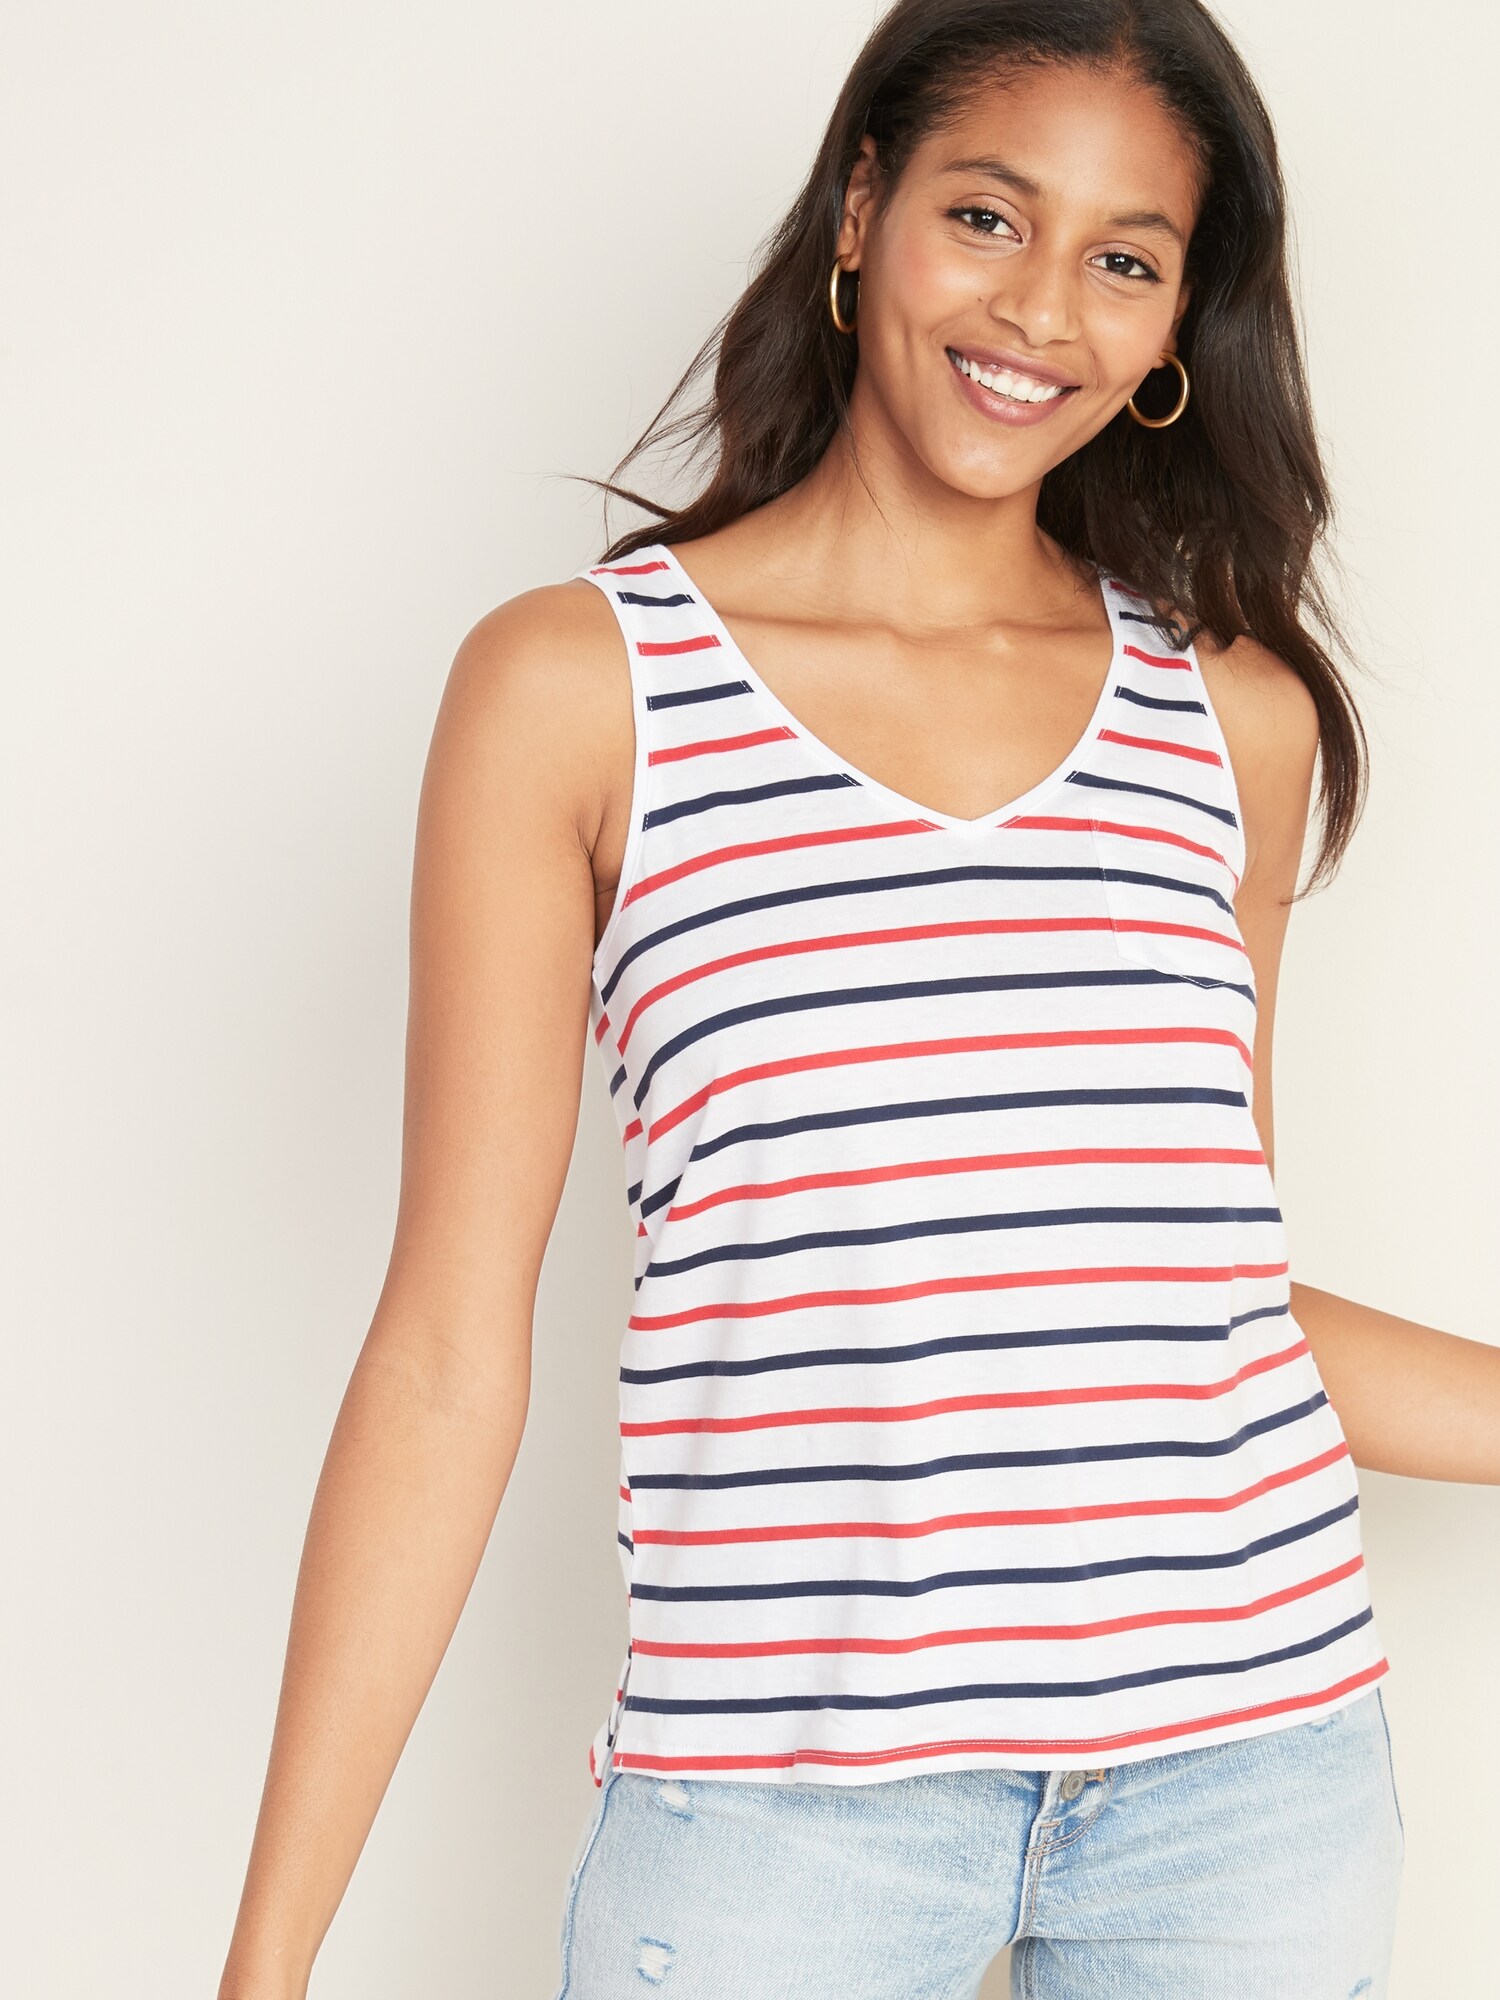 Old navy striped tank top